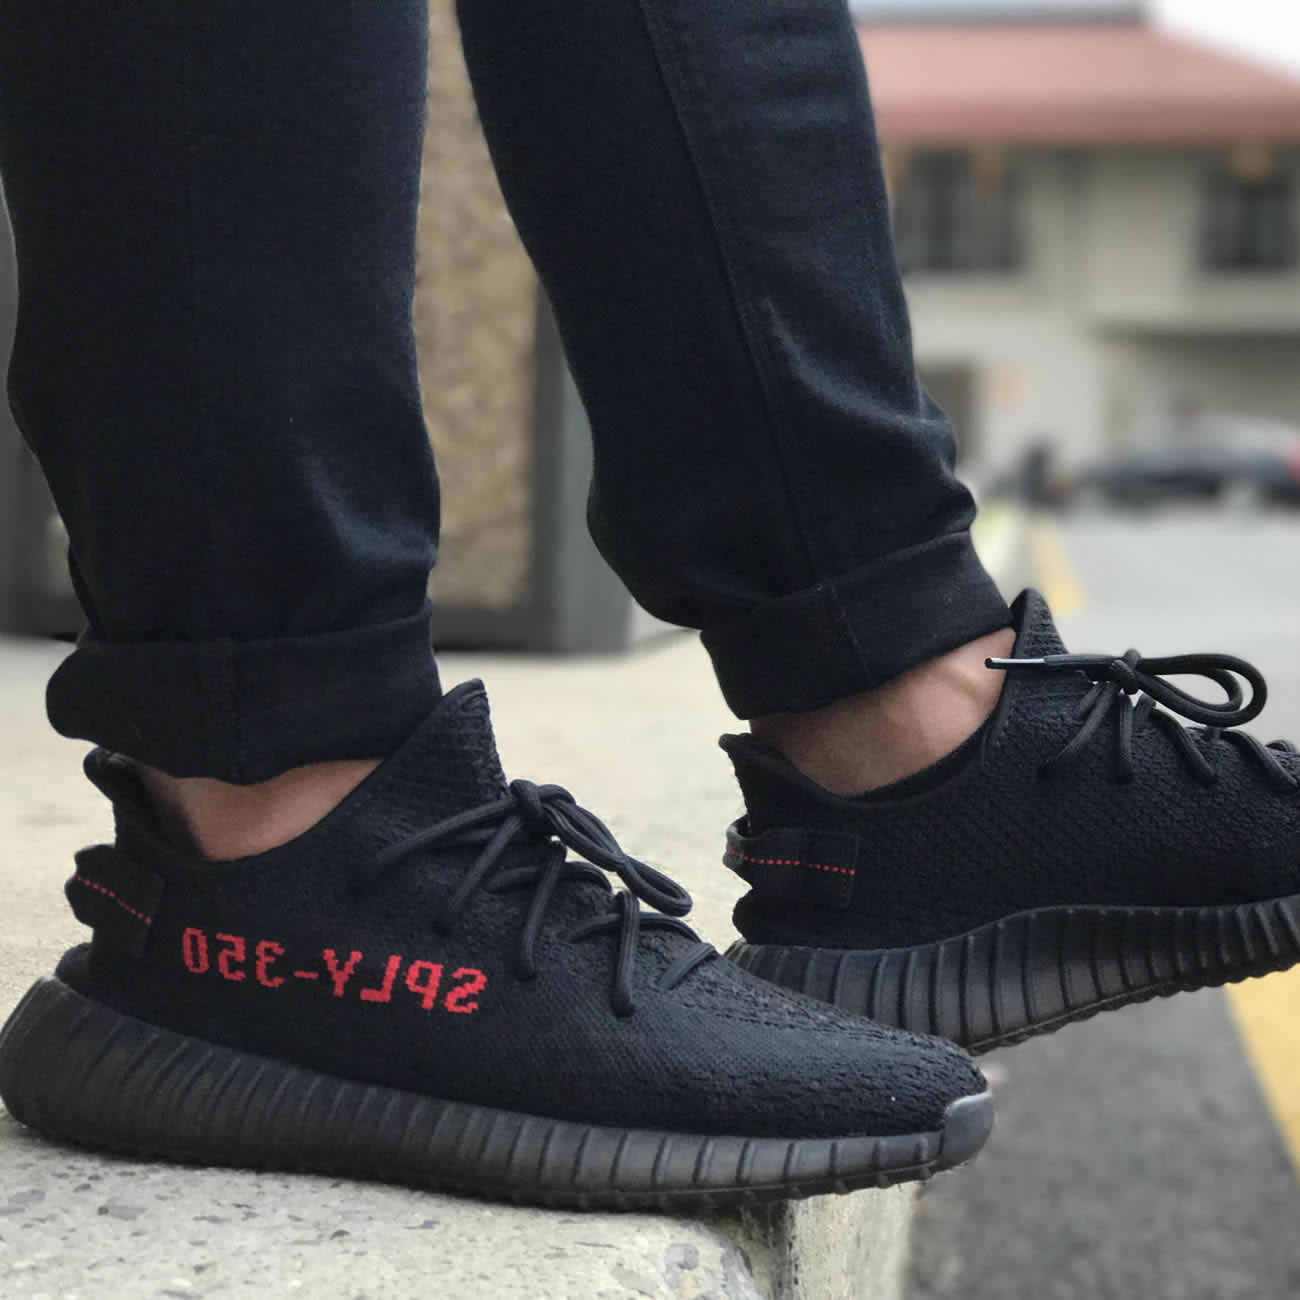 Yeezy Boost 350 V2 Bred Black Red 2020 On Feet Cp9652 (2) - newkick.org